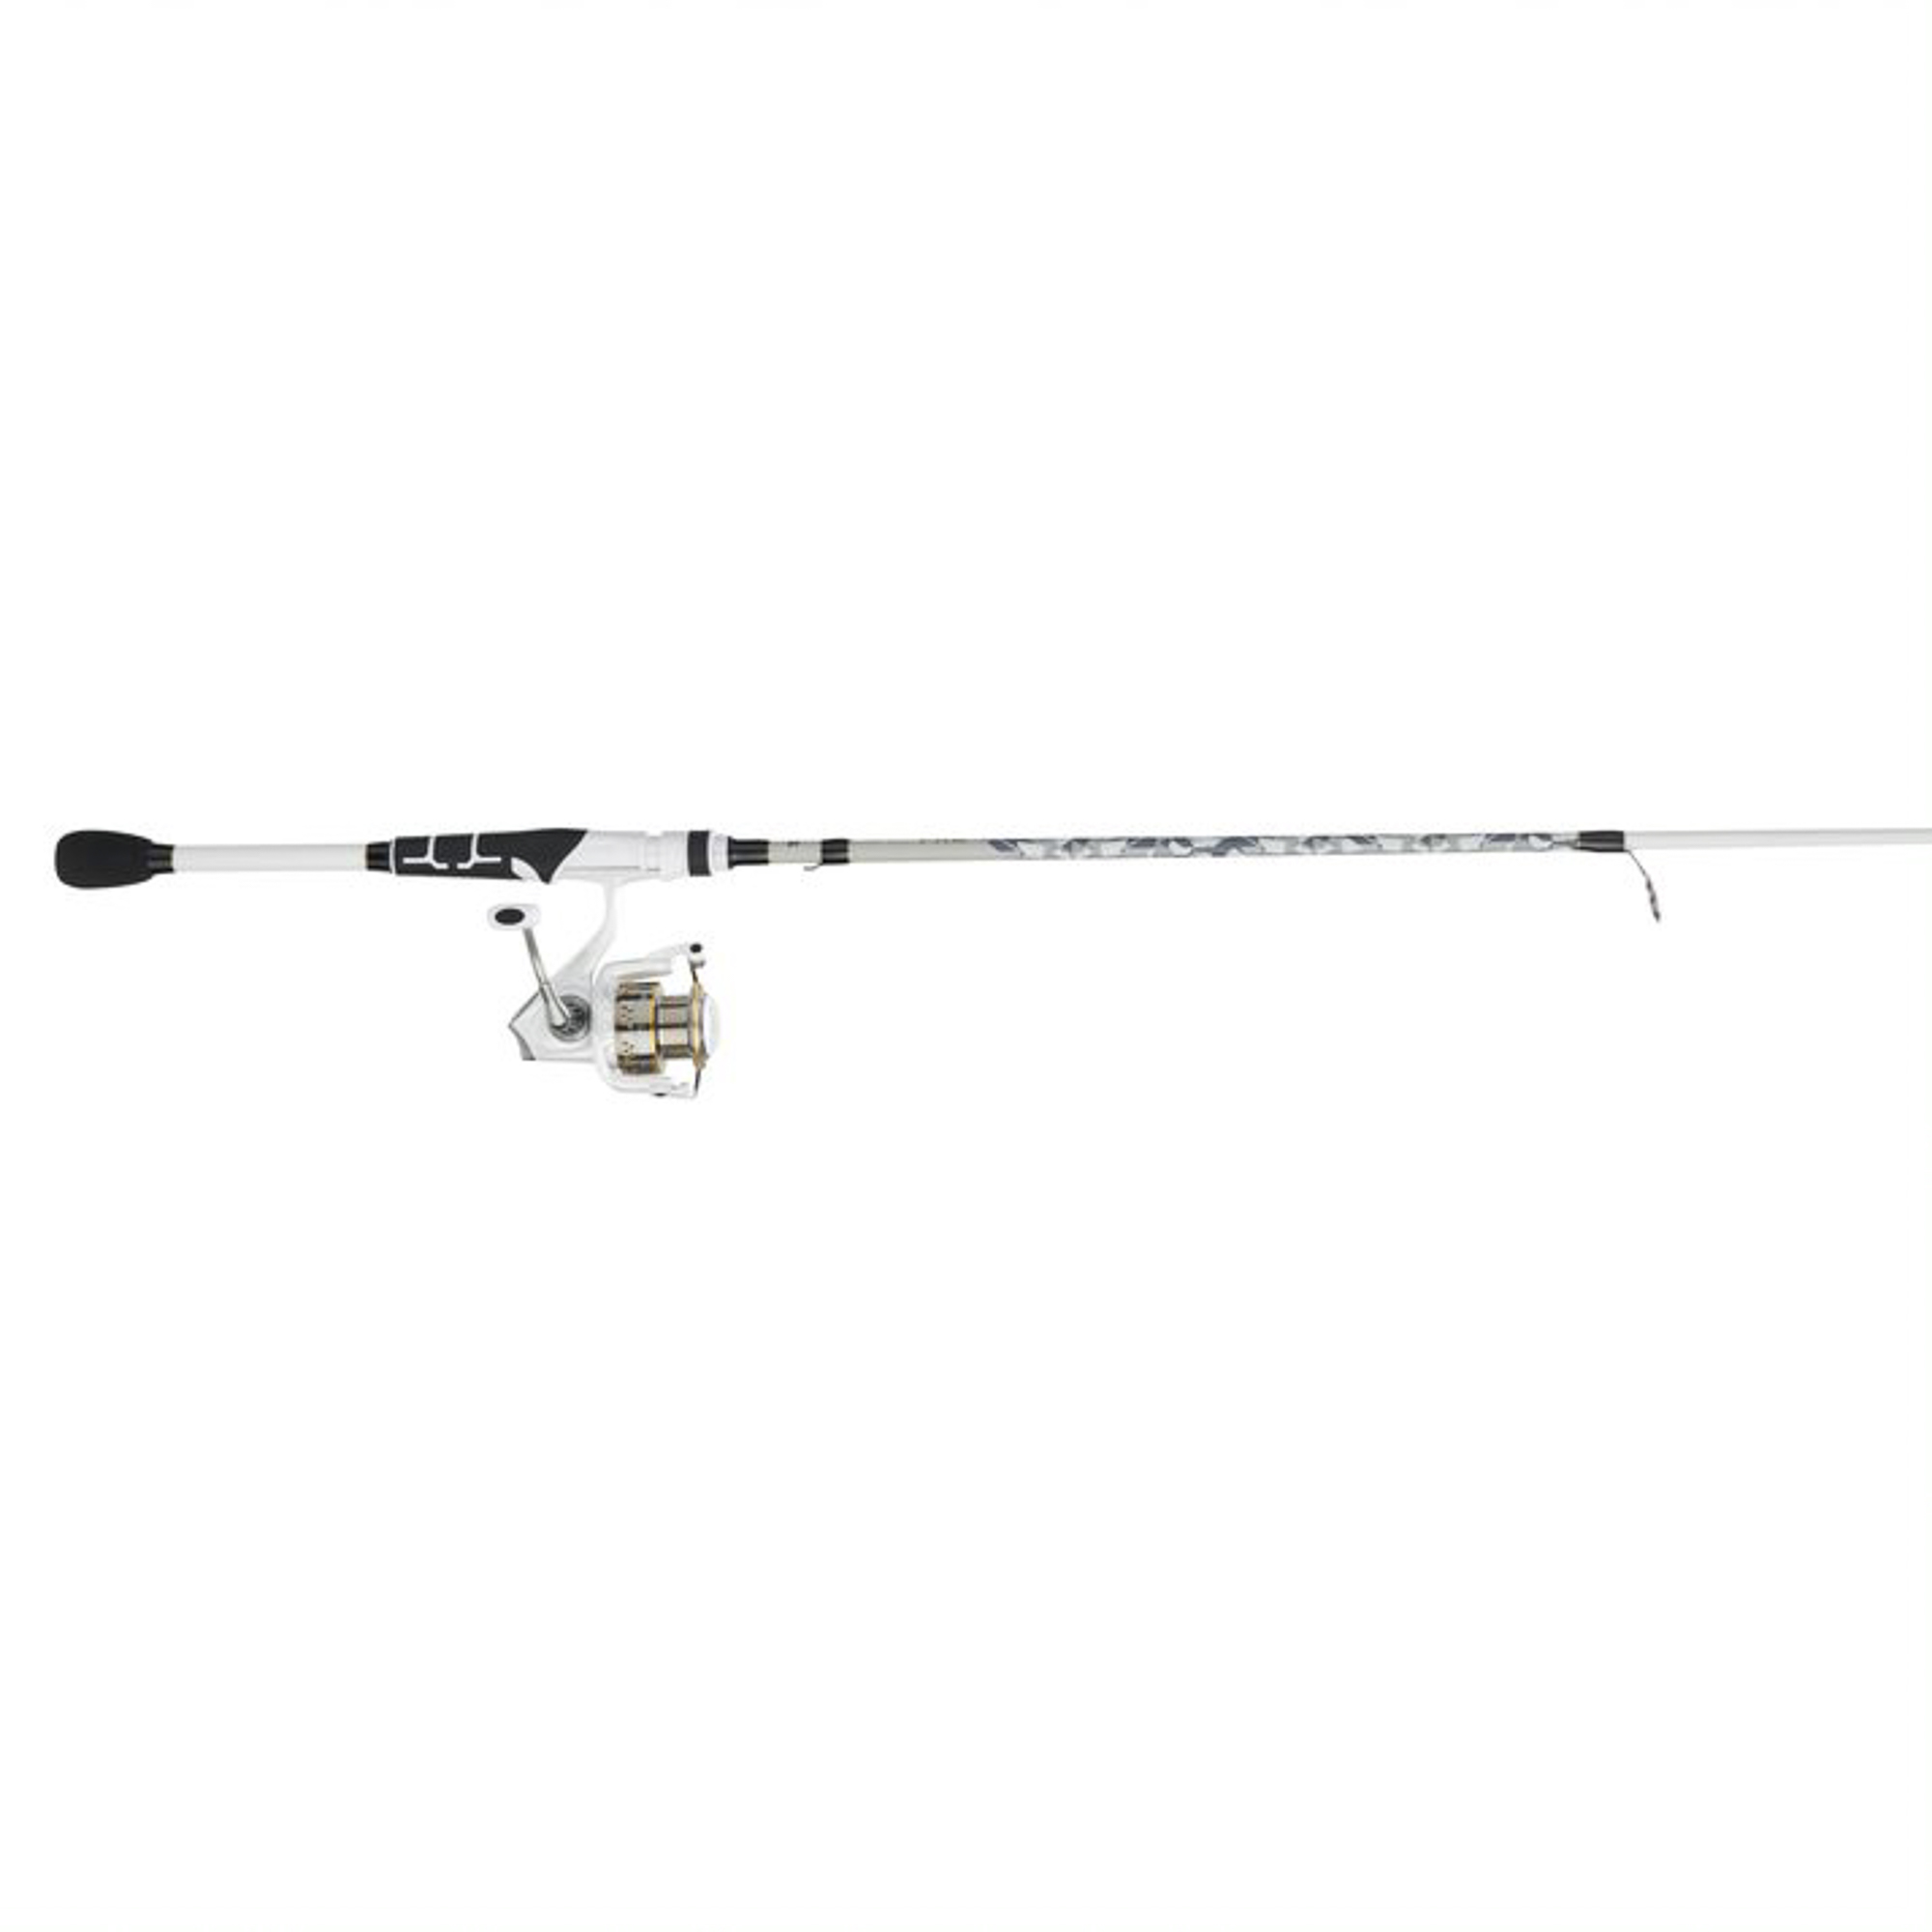 Abu Garcia Max Pro Spinning Rod and Reel Combo with Berkley Flicker Shad Bait Kit - image 3 of 6